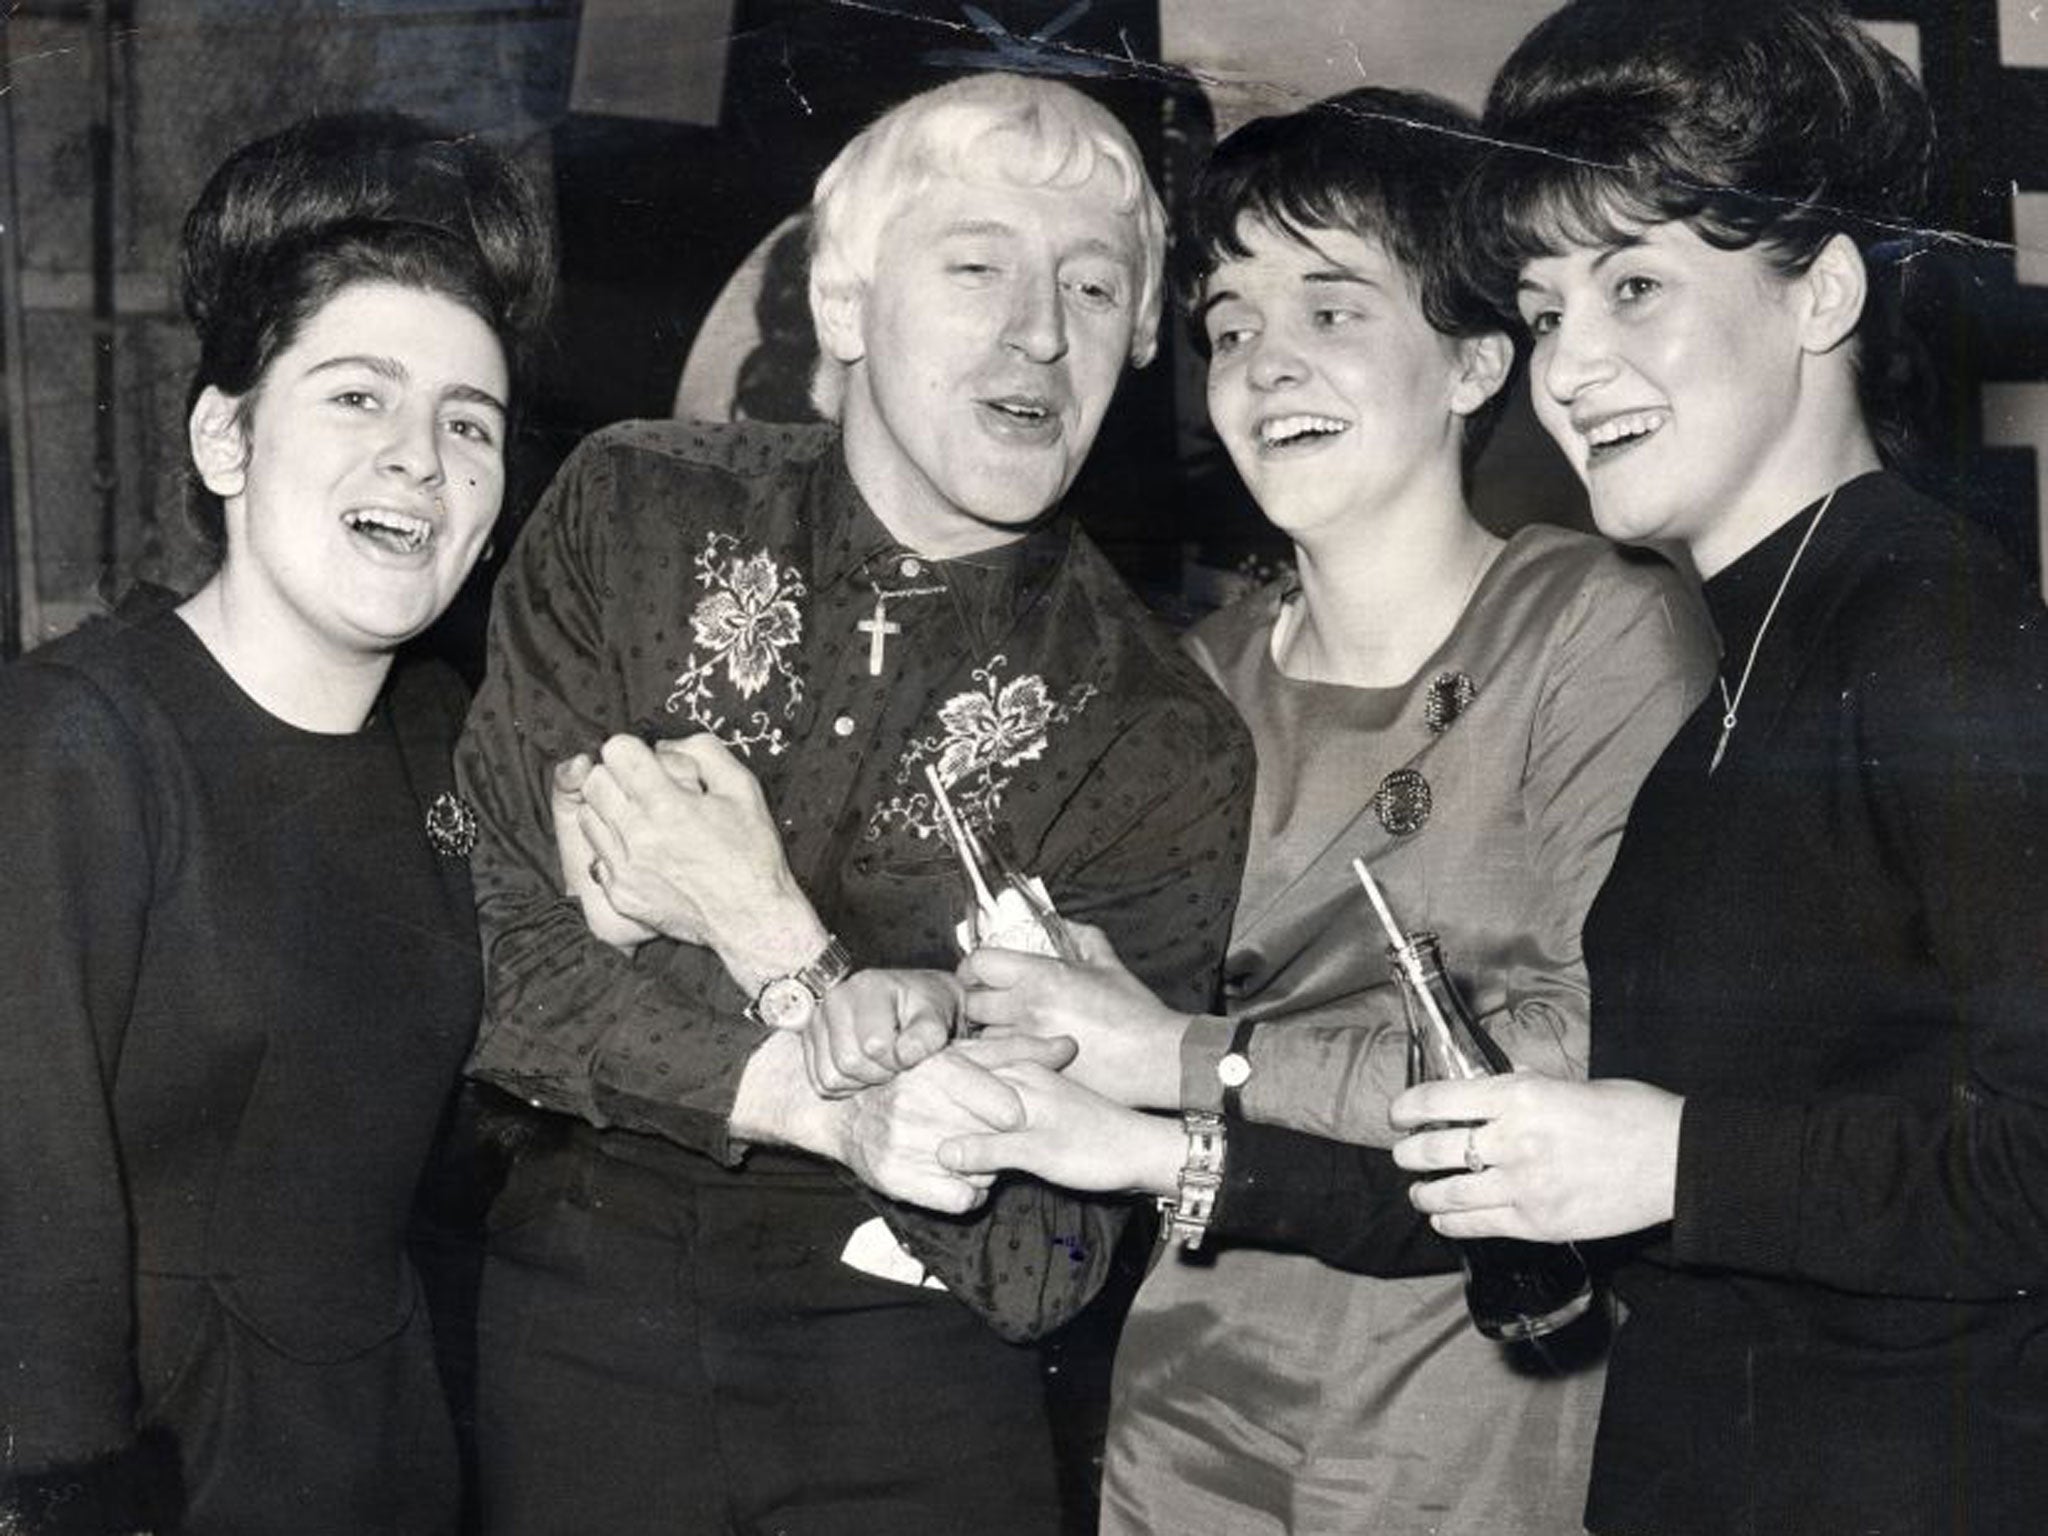 Jimmy Savile with Beatles fans in 1965